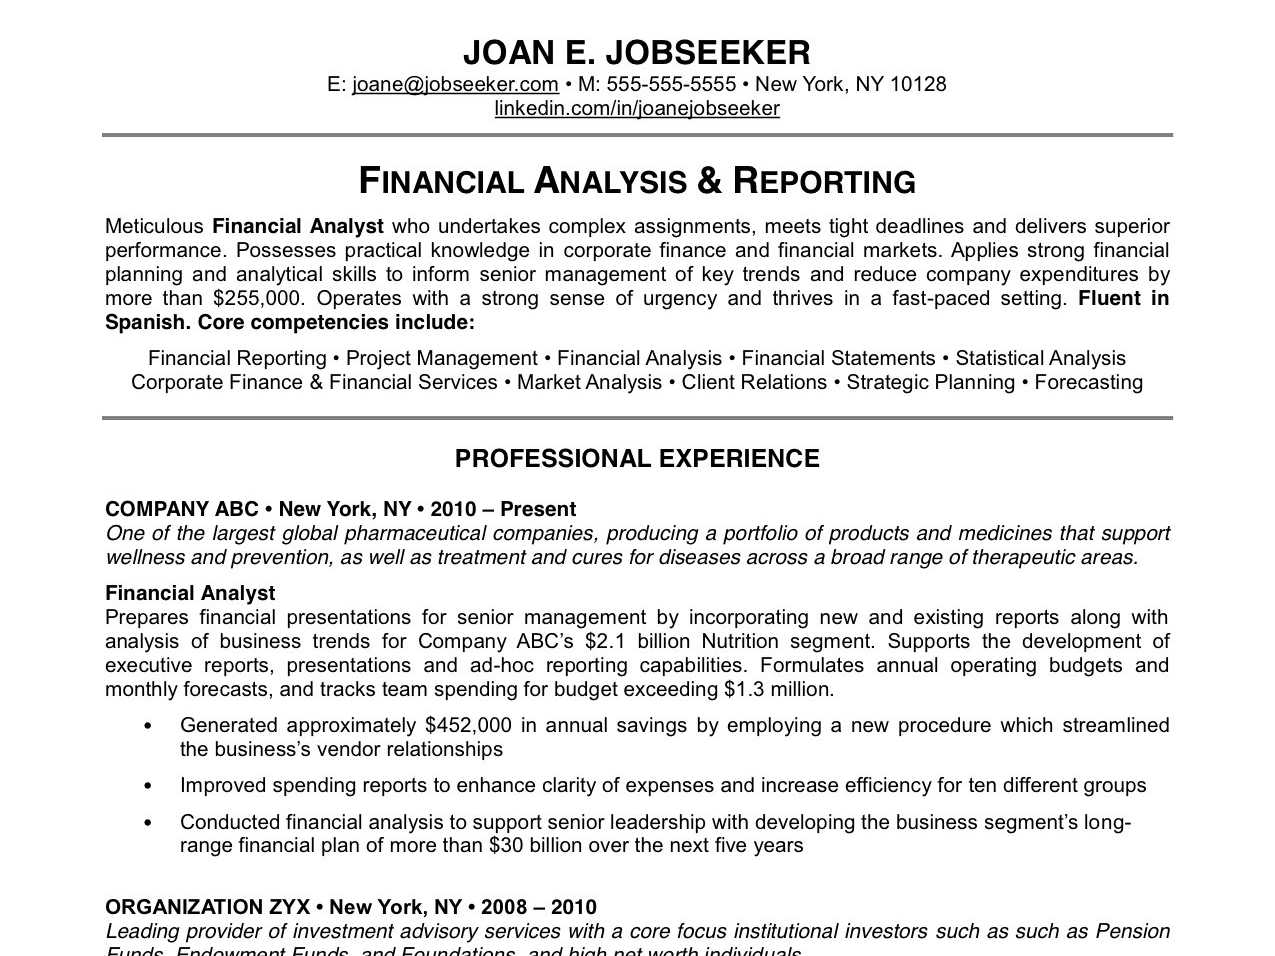 a great resume example creating a great resume examples how to make a great resume examples how to write a great resume examples a great example of a resume example of a great resume cover letter example of a great resume for entry level a good resume headline example a good resume example for a highschool student a good resume objective example the perfect resume objective sample example of a great resume 2018 example of a great resume summary example of a great paralegal resume great resume example great resume examples great resume examples 2019 great resume examples reddit great resume examples for marketing great resume examples for sales great resume examples for college students great resume examples for customer service great resume examples for teachers great resume examples 2018 